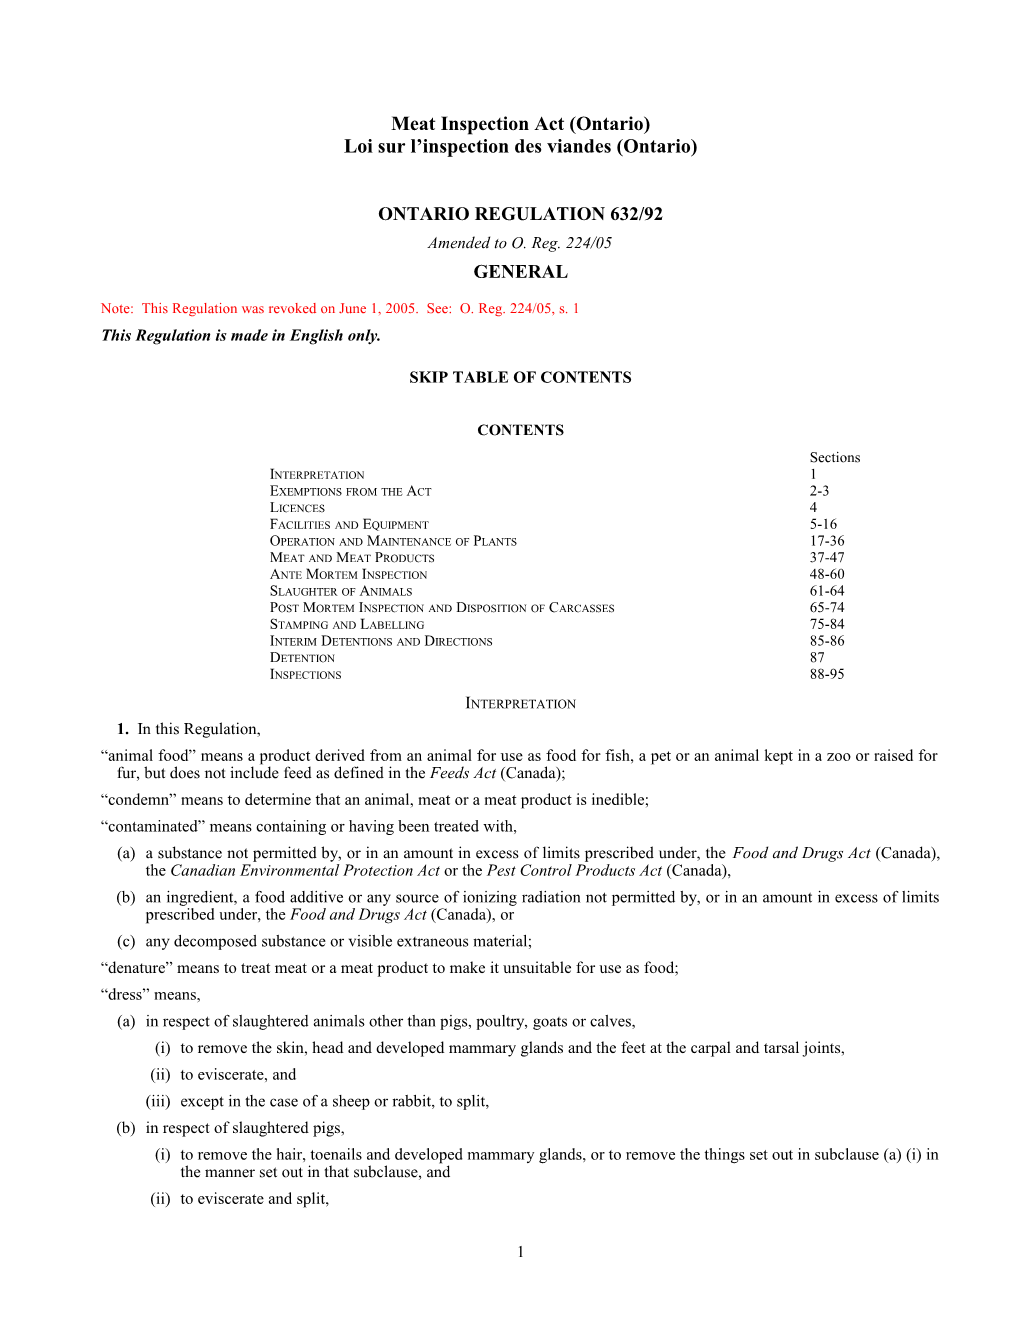 Meat Inspection Act (Ontario) - O. Reg. 632/92